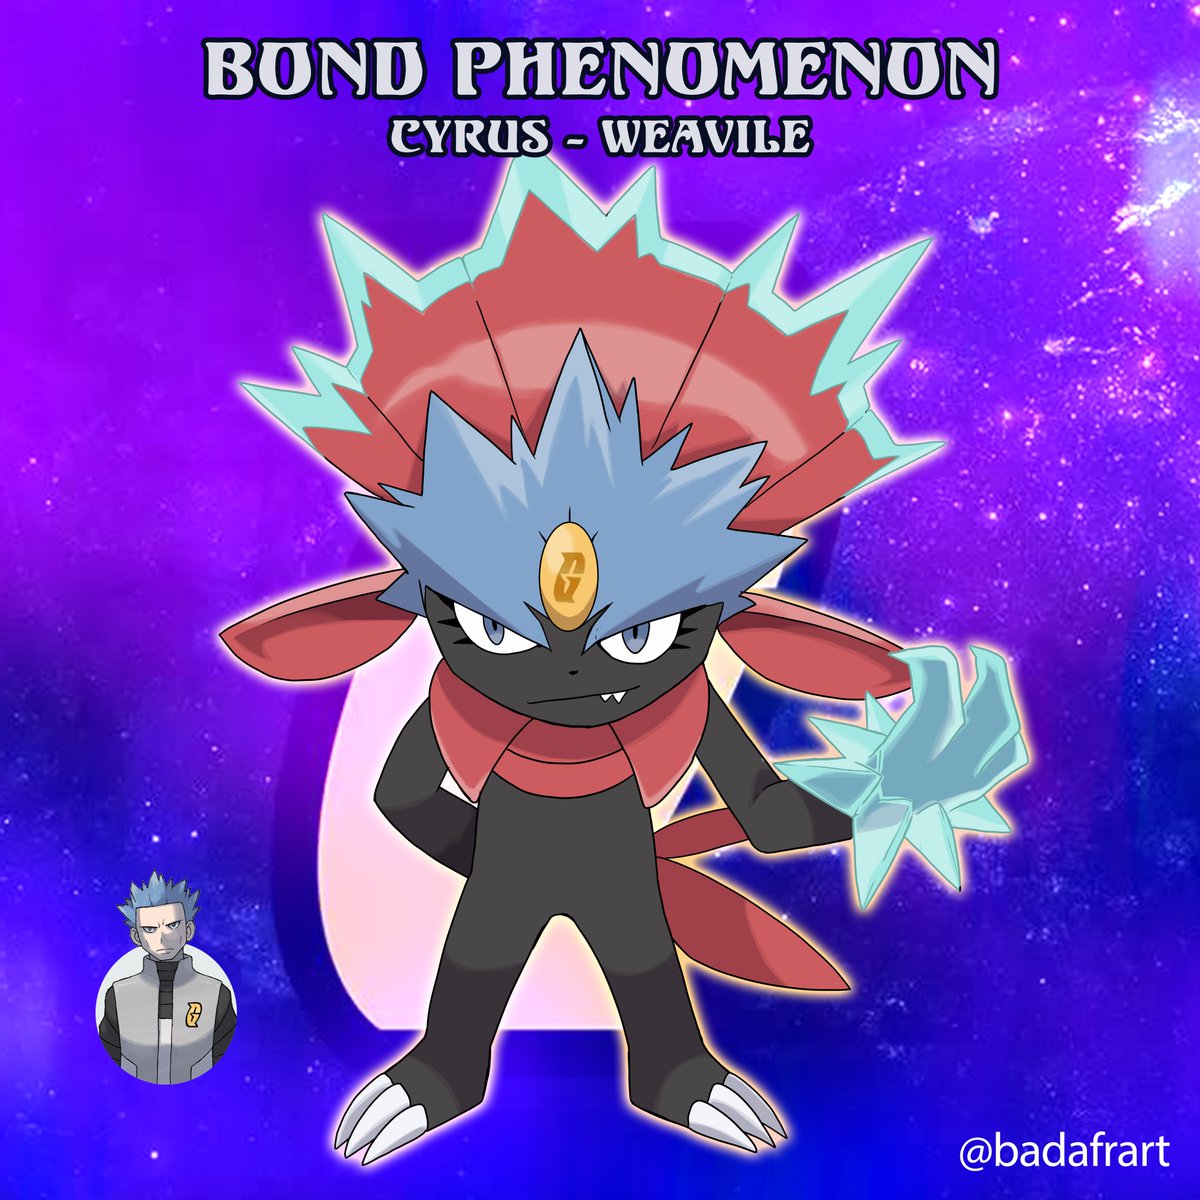 I'M BACK!!!
Meet Cyrus Weavile!
As soon as it enters the field, it strengthens the Pokémon's bond with its Trainer, and it becomes Cyrus-Weavile! Ice Punch becomes more powerful and has a 40% chance to freeze the opponent. #sinnoh #kensugimoriart #bondphenomenon #fakemonart